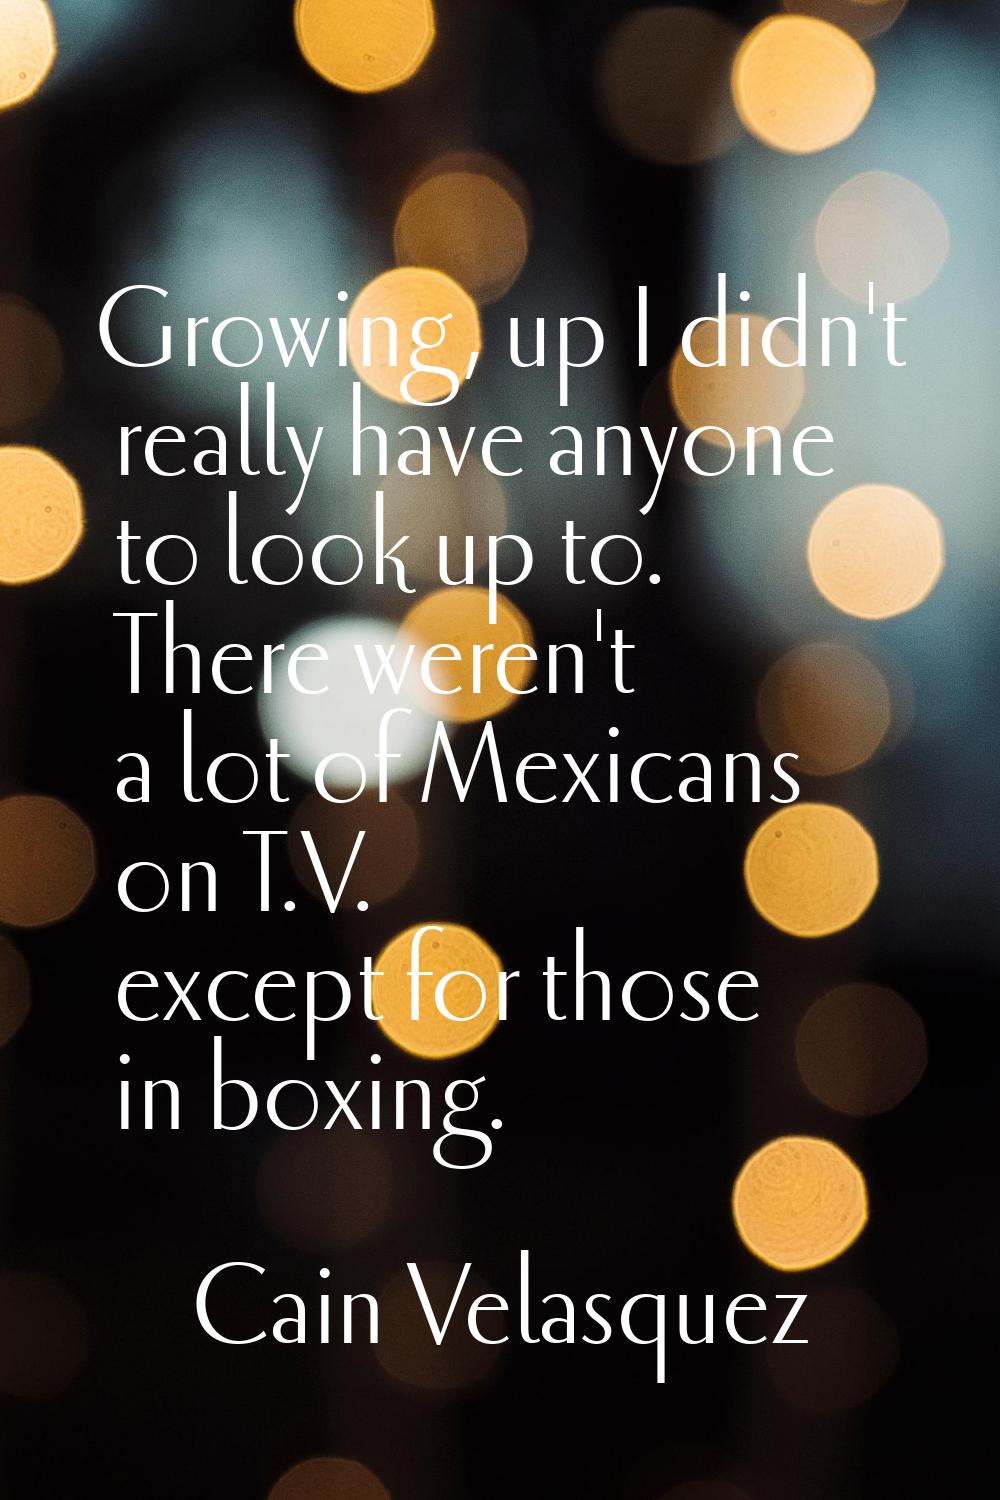 Growing, up I didn't really have anyone to look up to. There weren't a lot of Mexicans on T.V. exce